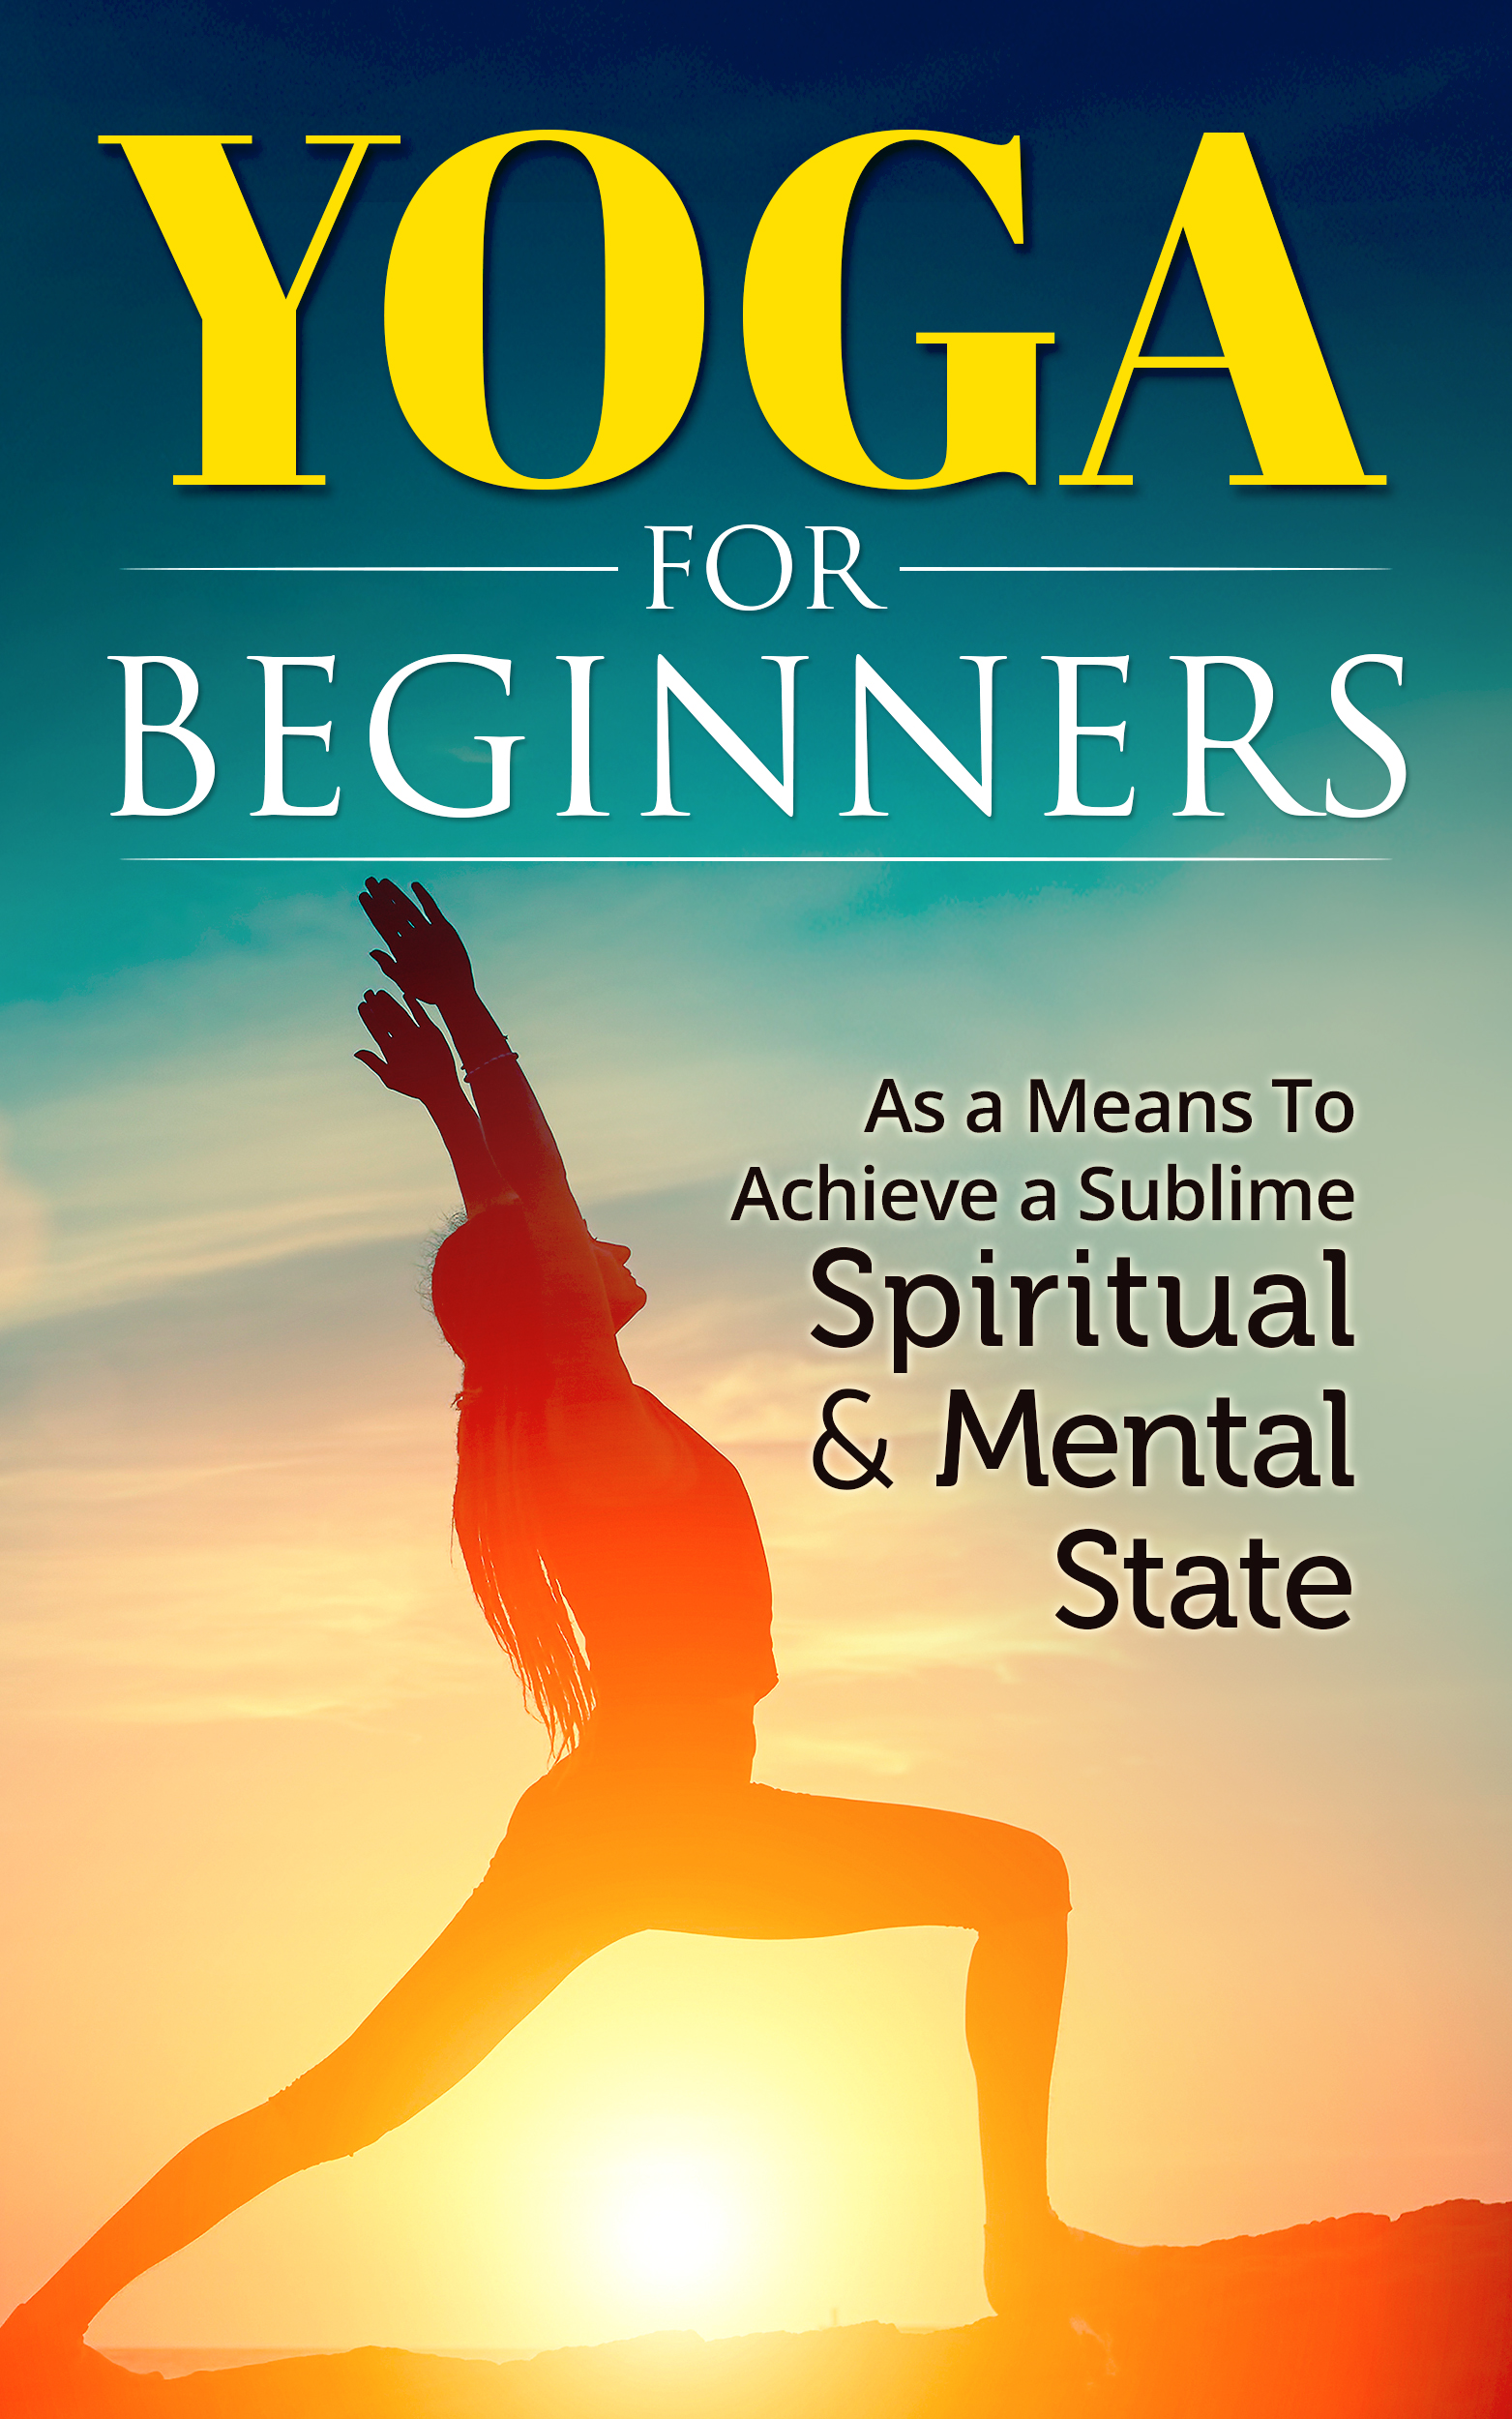 FREE: Yoga for beginners: As a Means To Achieve a Sublime Spiritual and Mental State by Stepan Portnov